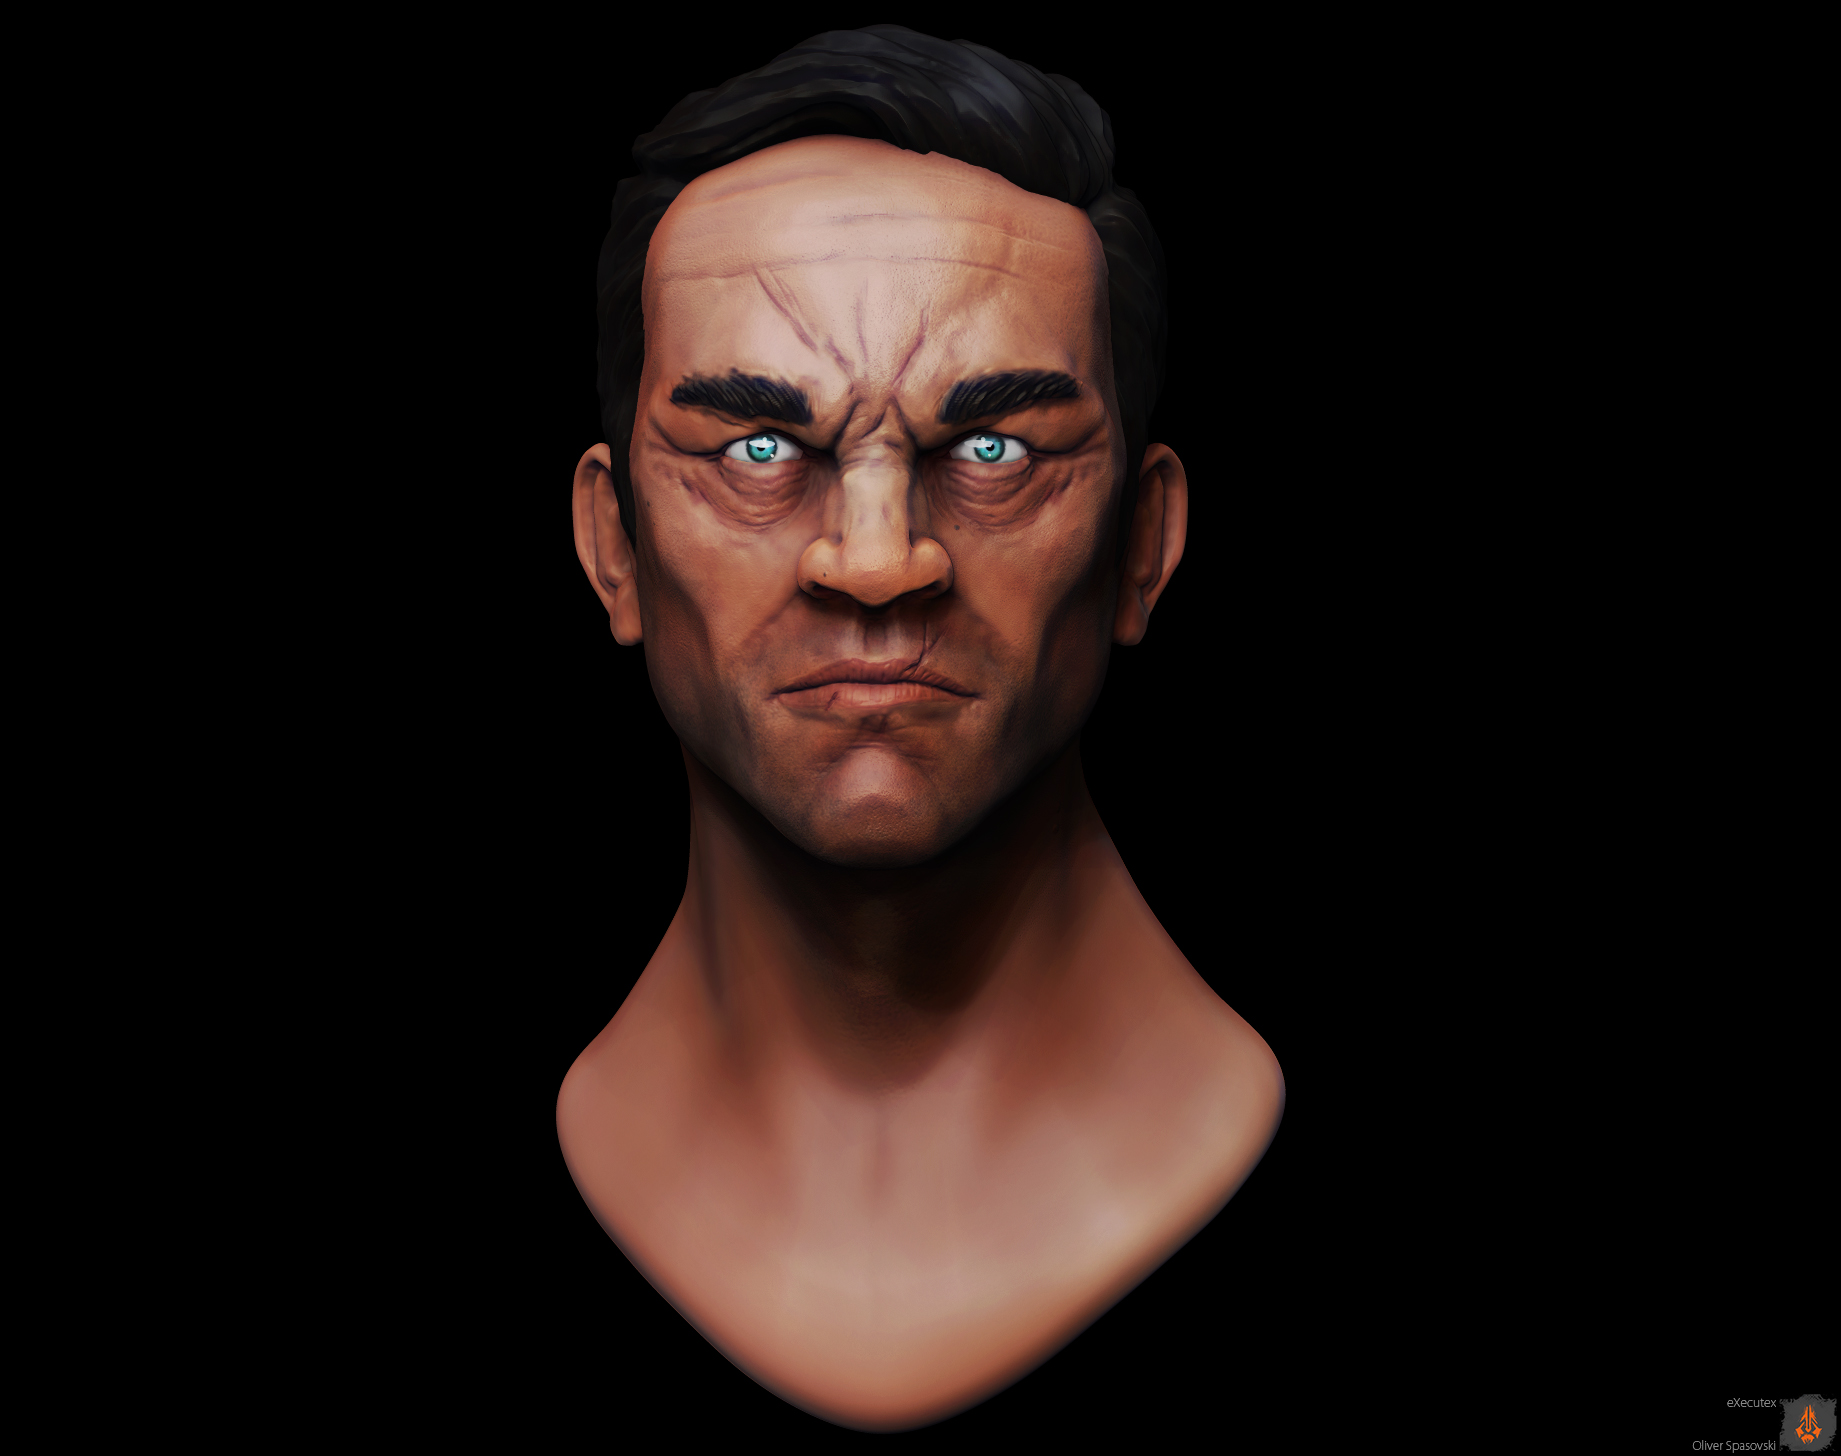 gang_bust_dishonored_by_executex-d6yuf84.jpg